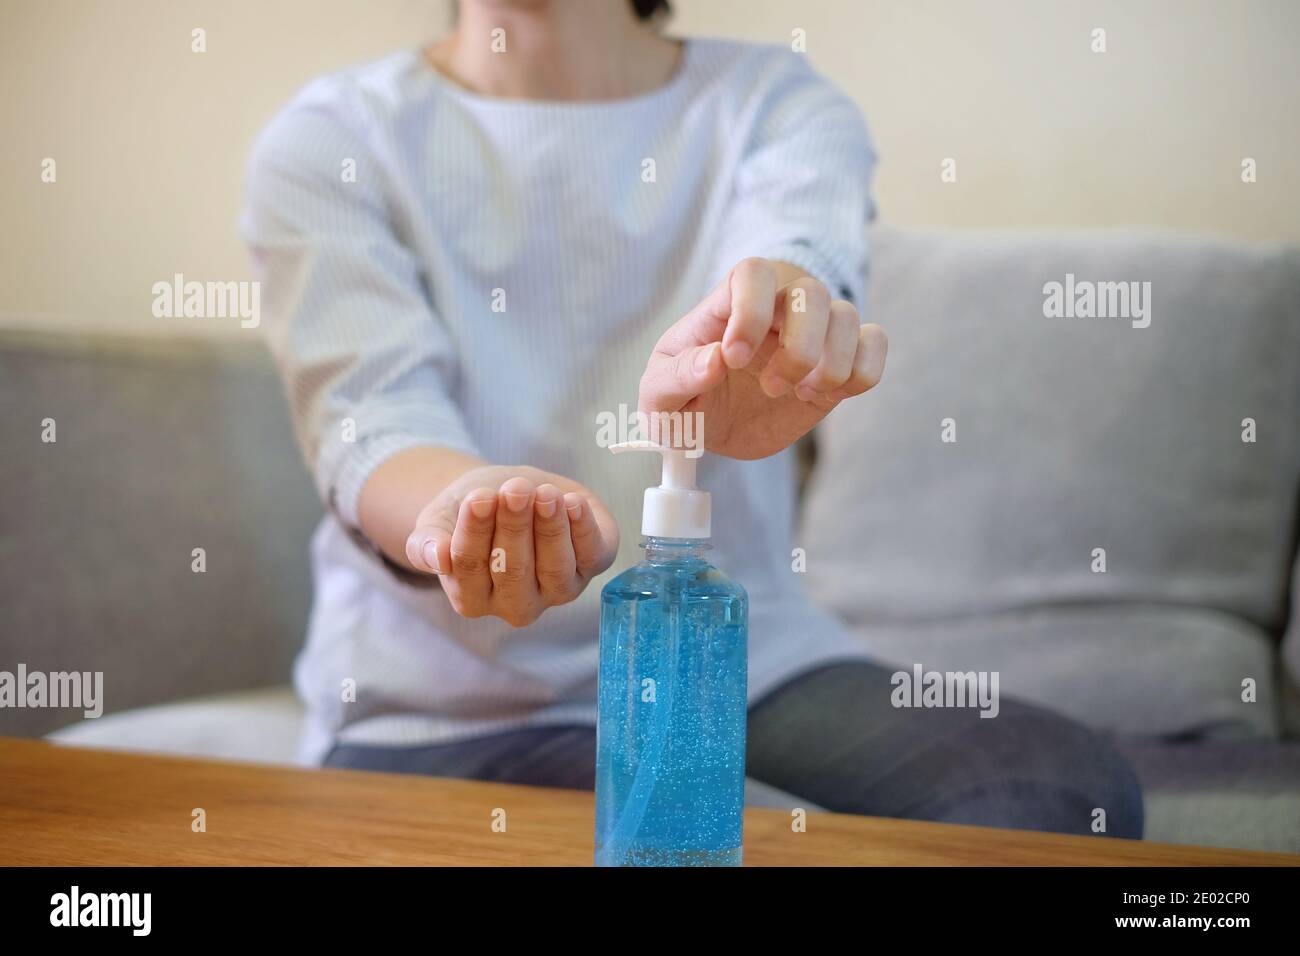 A woman squeezing a clear bottle of blue antibacterial gel on a wooden table to clean her hands. Stock Photo